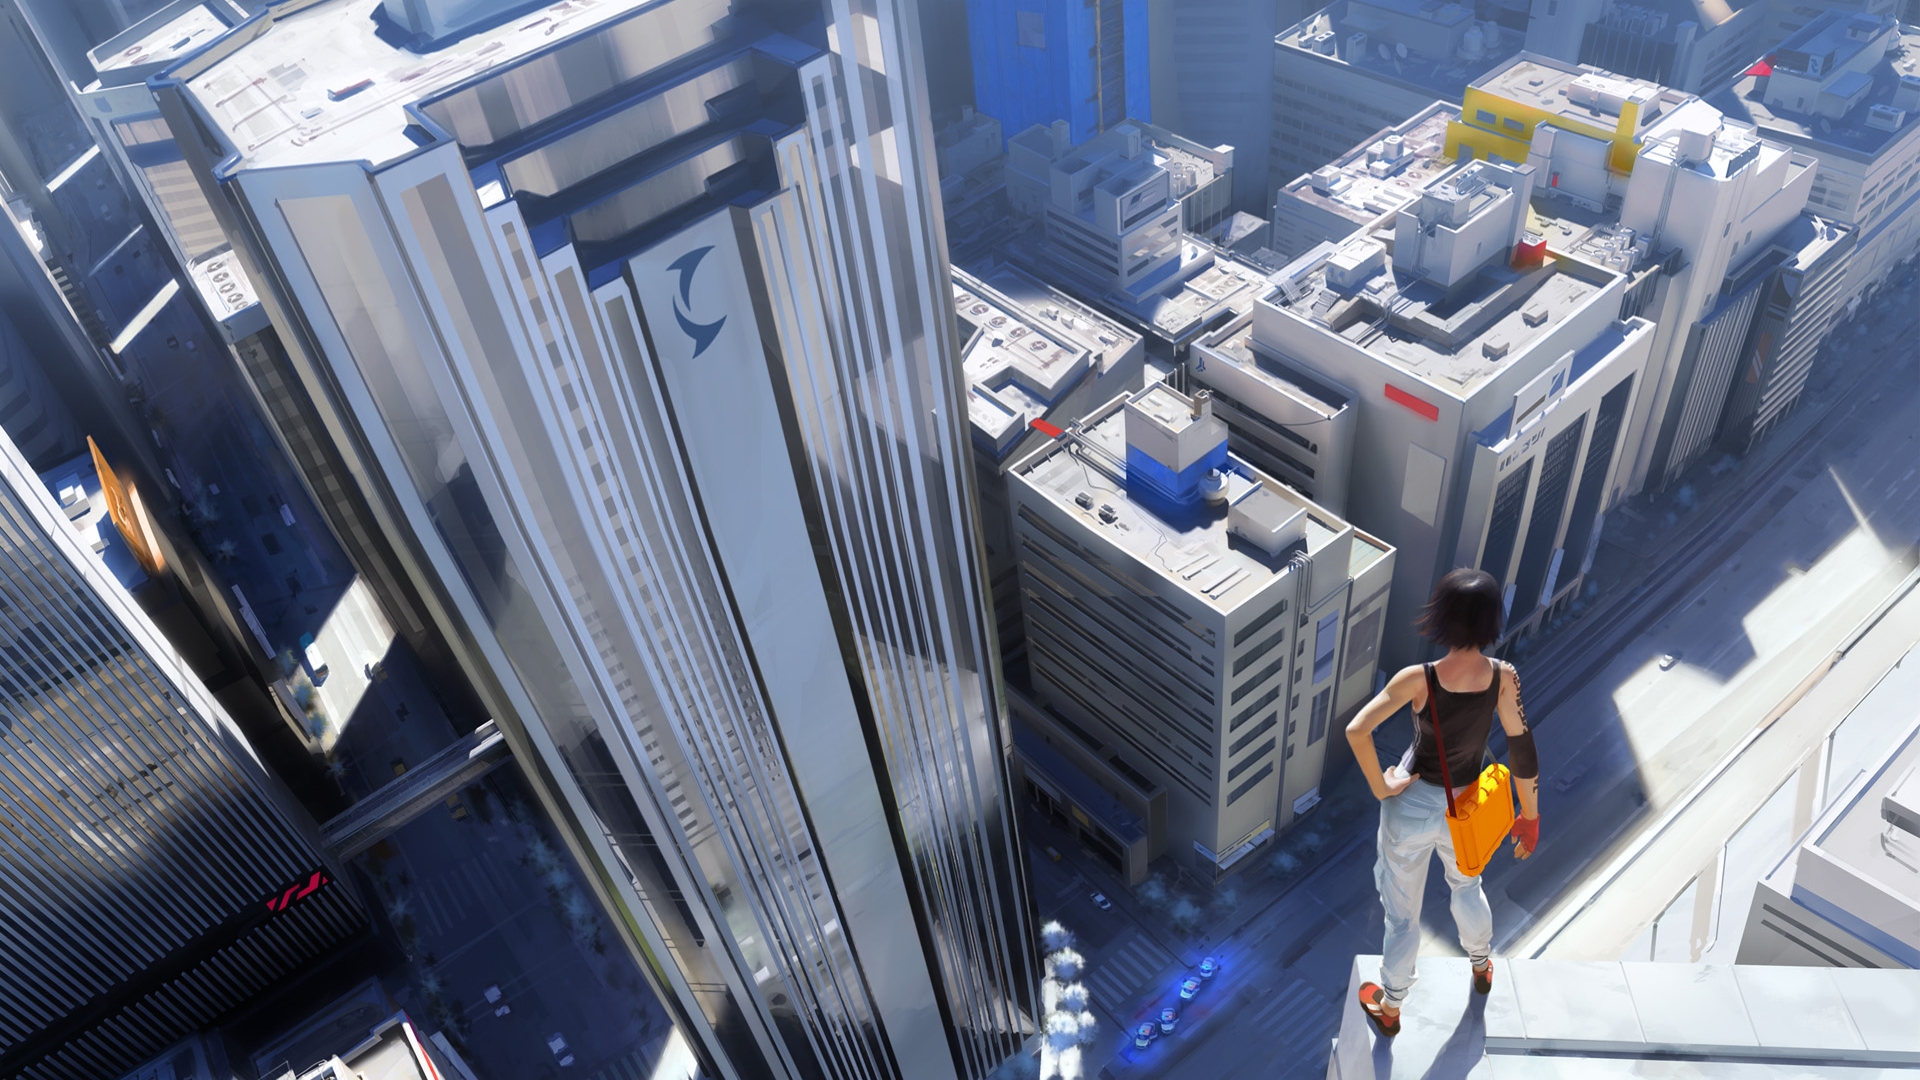 Mirror's Edge Images - LaunchBox Games Database